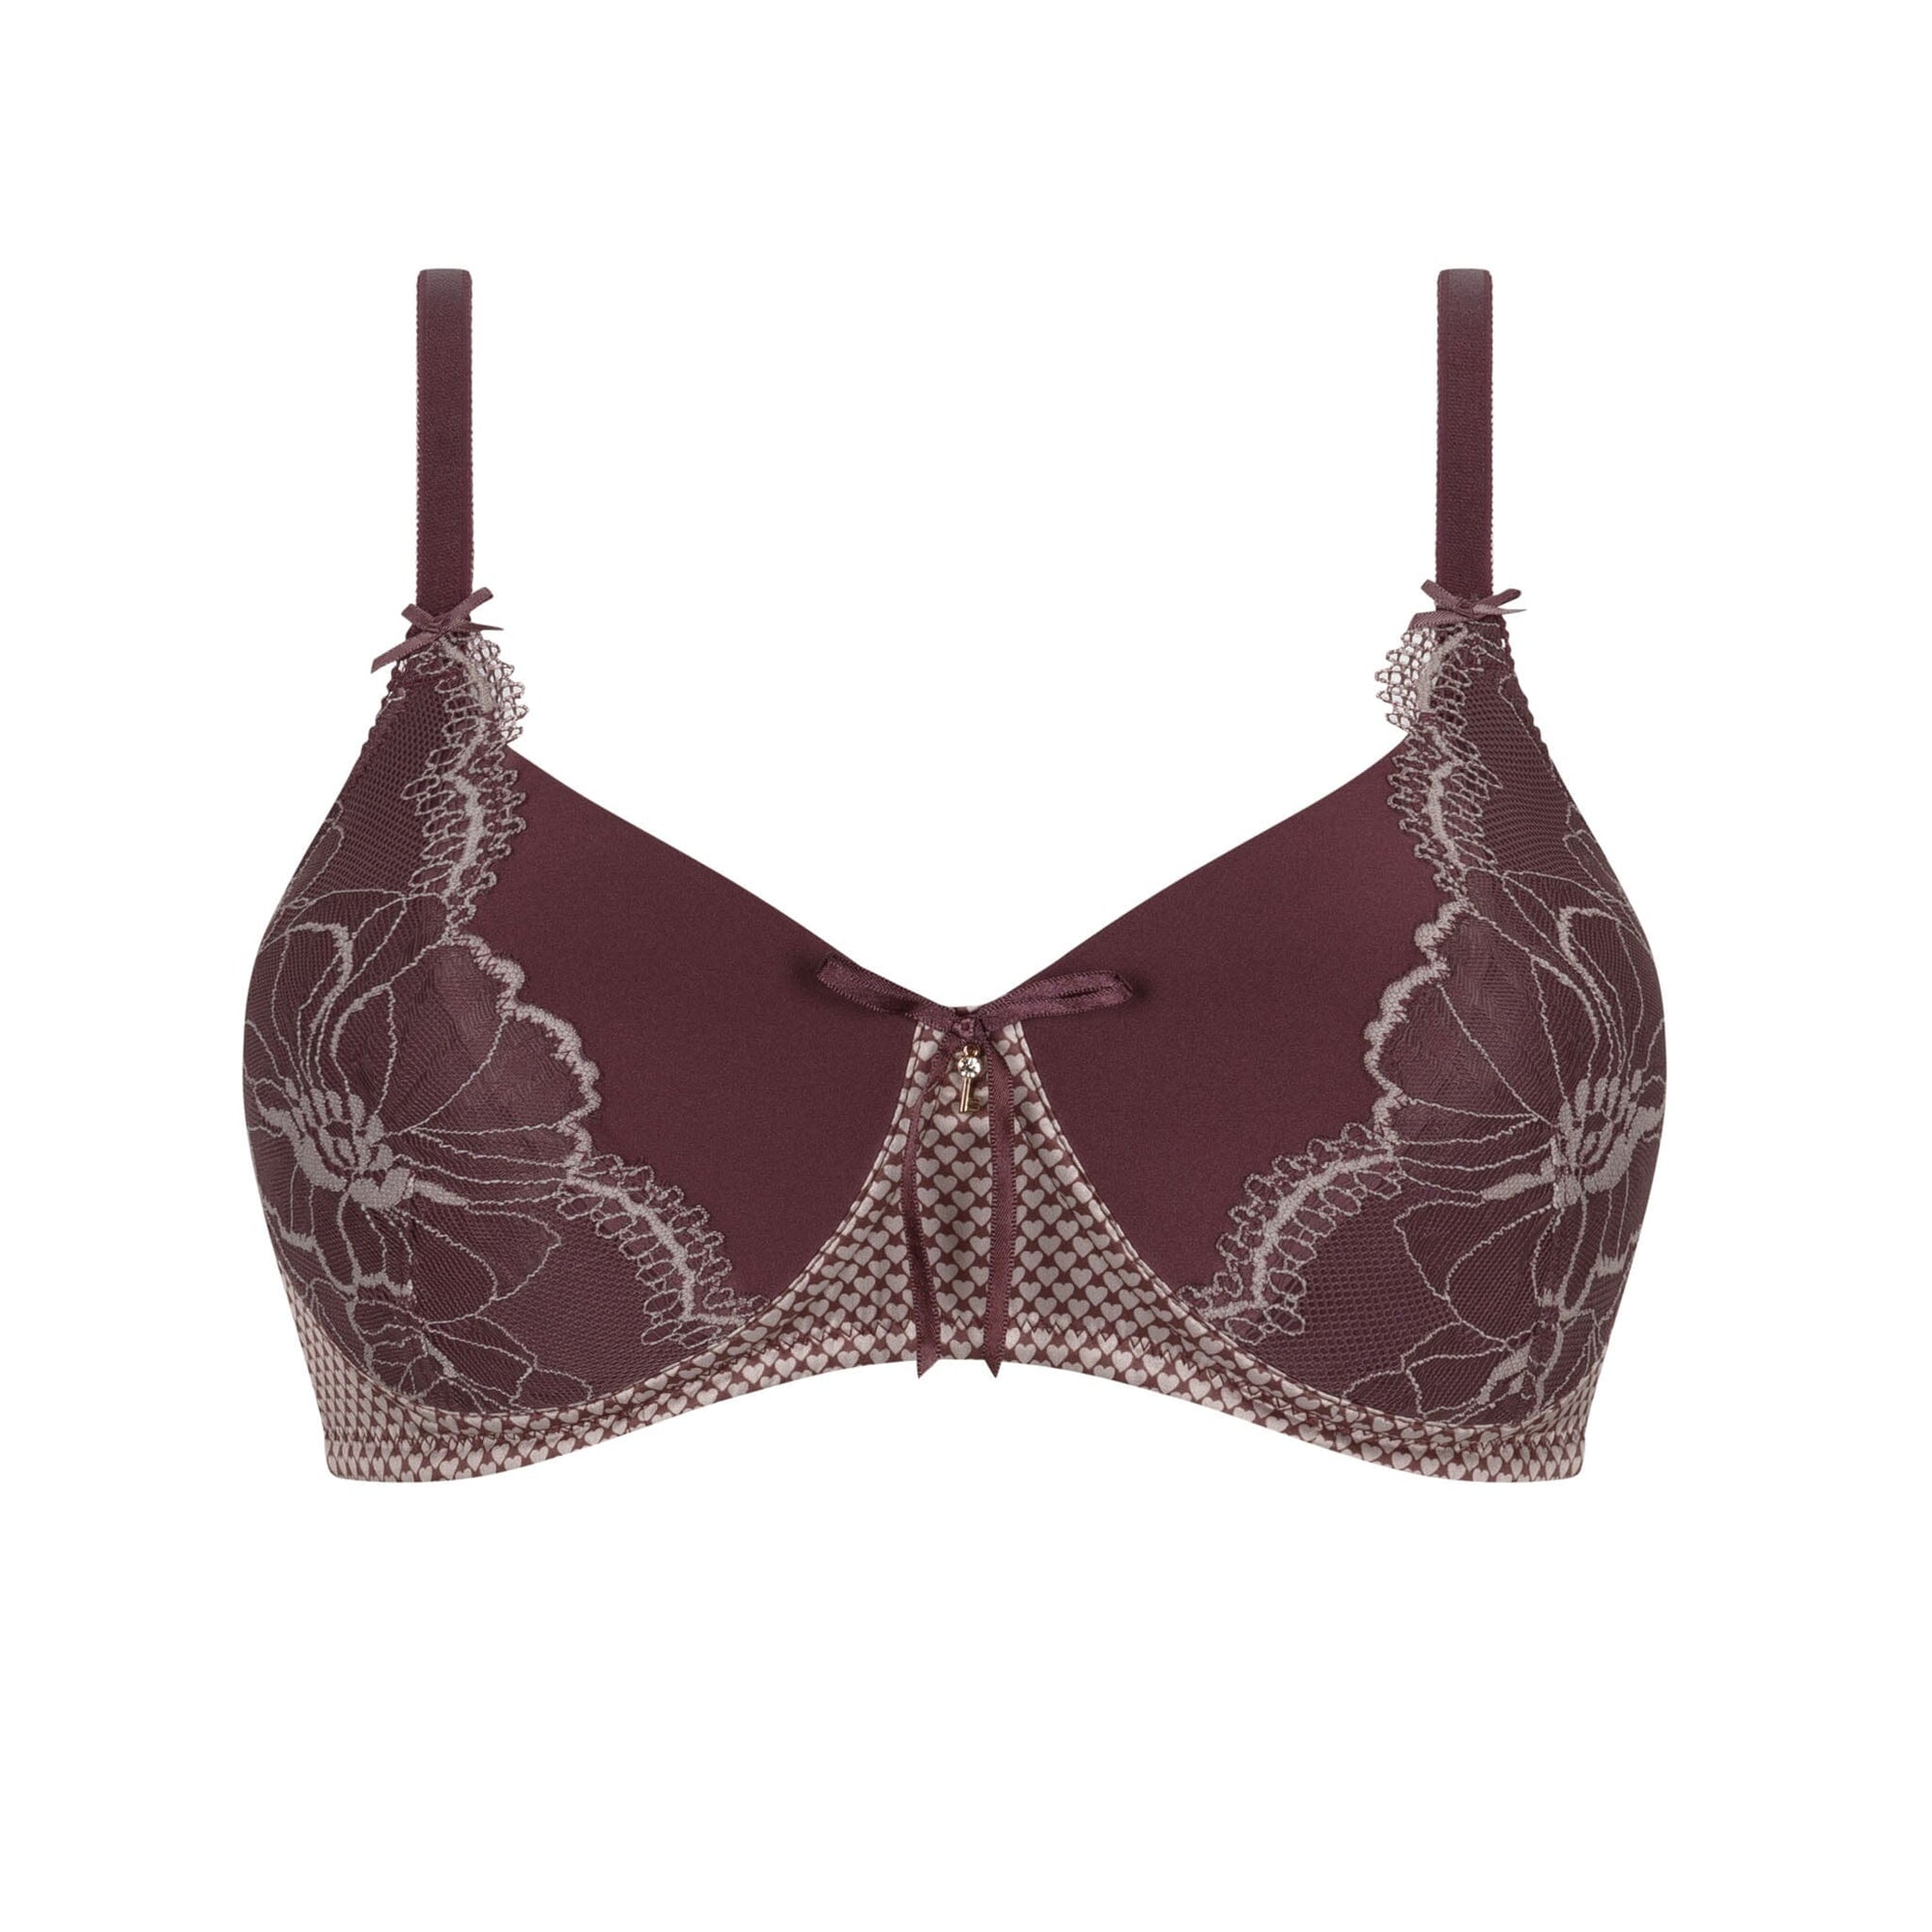 Amoena® Be Amazing Padded Wire-Free Bra Shown in Sweet Chocolate/Taupe-Ribbon Detail